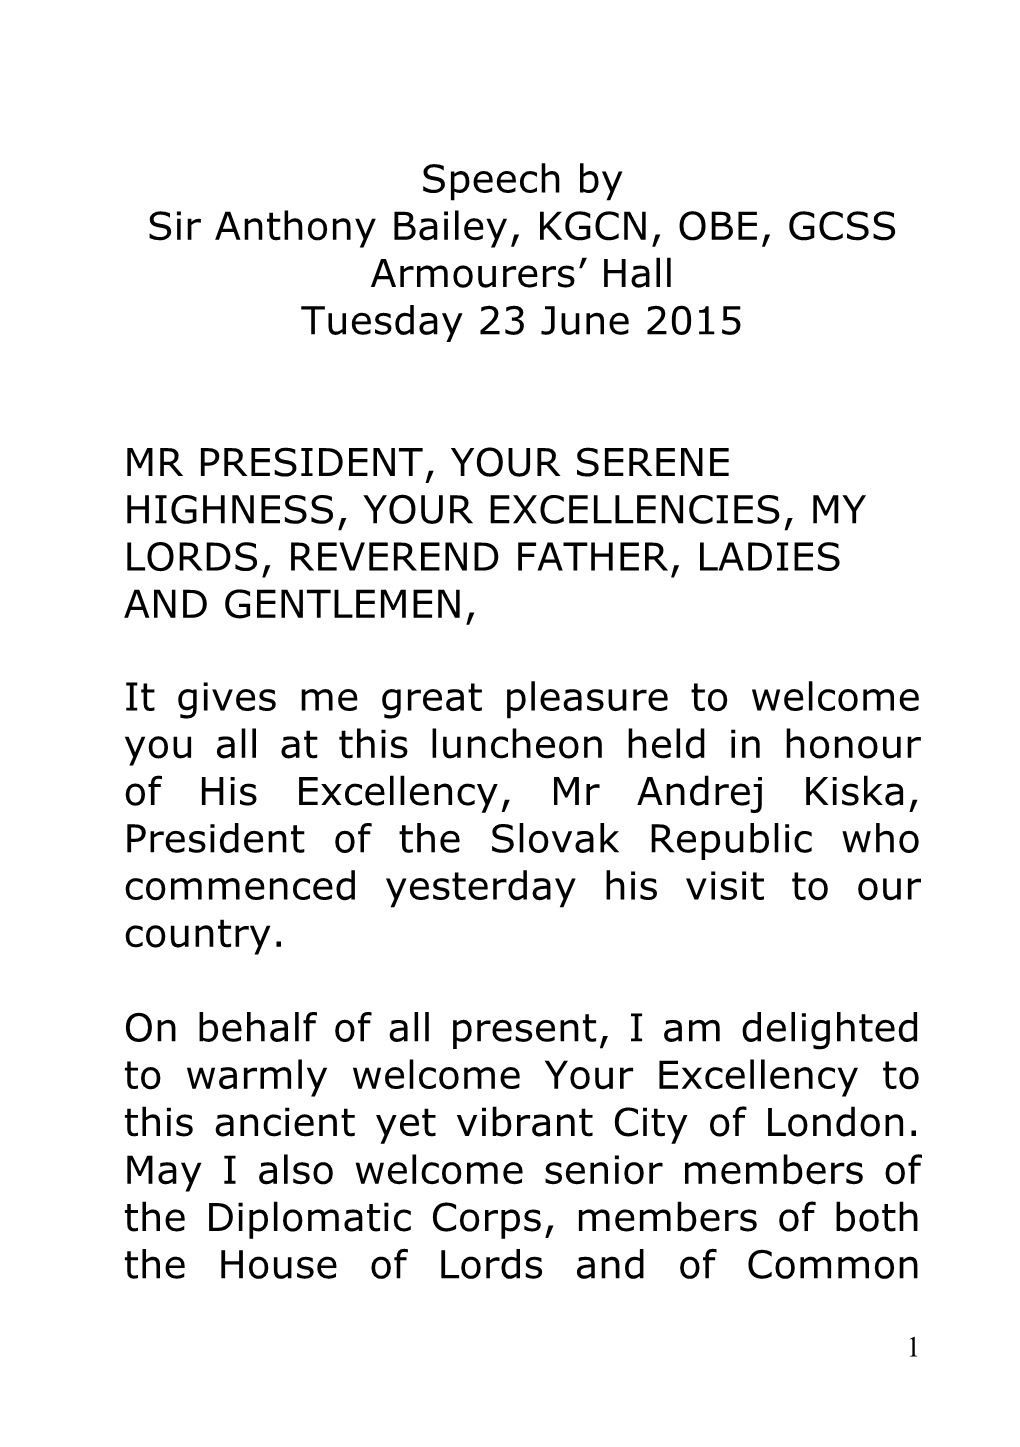 Speech by Sir Anthony Bailey, KGCN, OBE, GCSS Armourers' Hall Tuesday 23 June 2015 MR PRESIDENT, YOUR SERENE HIGHNESS, YOUR EX